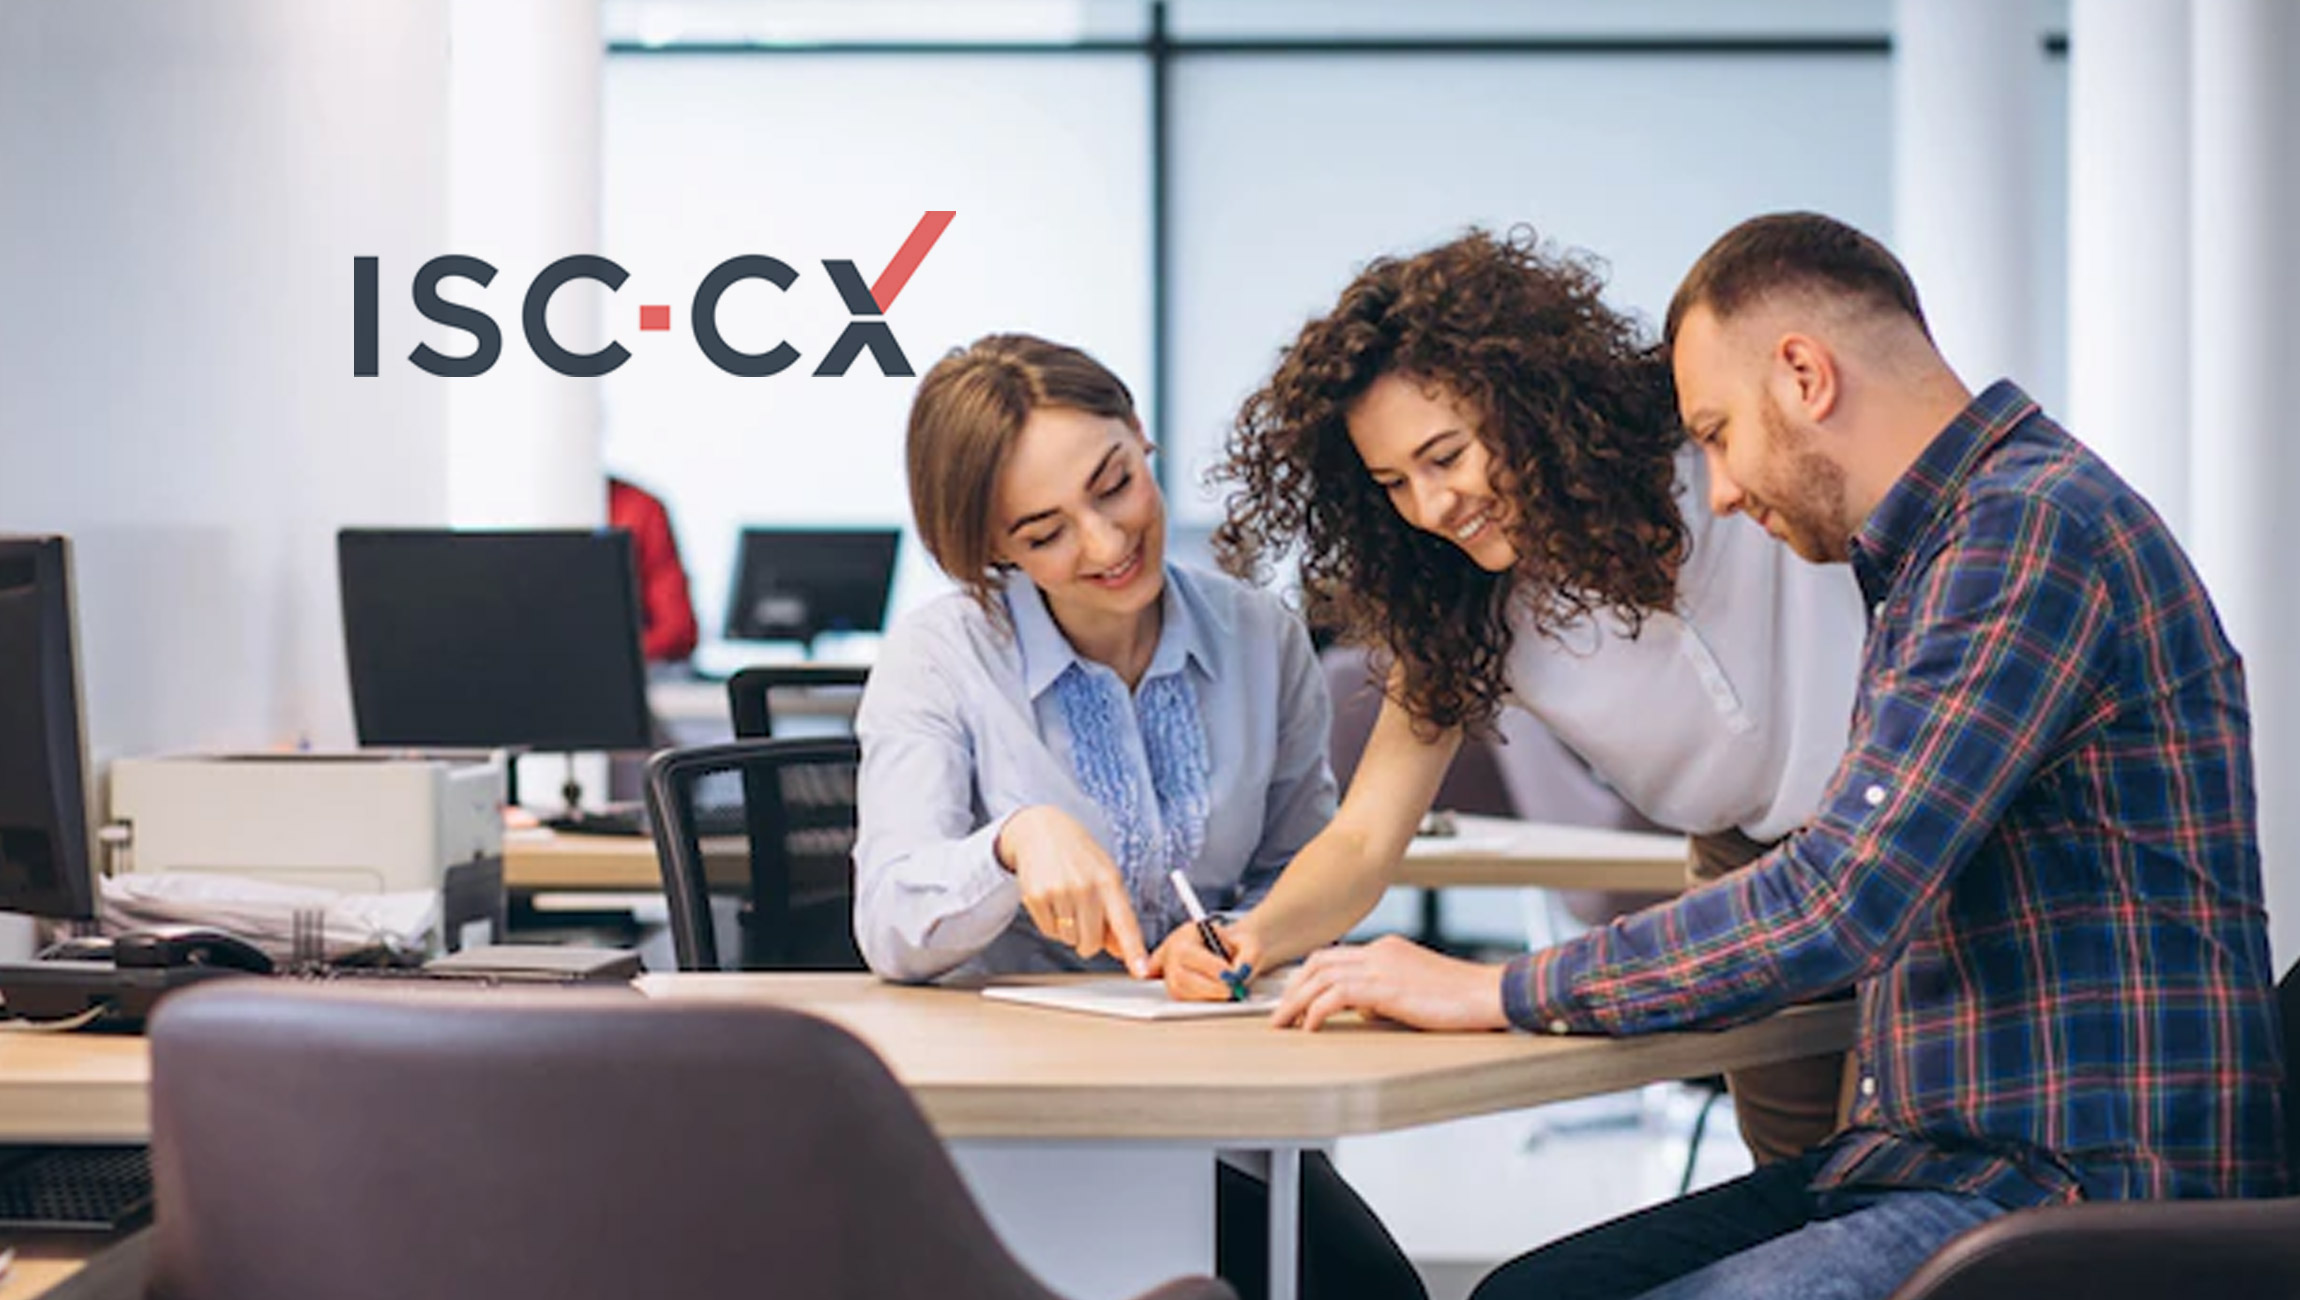 ISC-CX Evaluators Spend an All-time High of 700K Minutes Actively Capturing Customer Experience Data for Global Retailers during April 2022 1